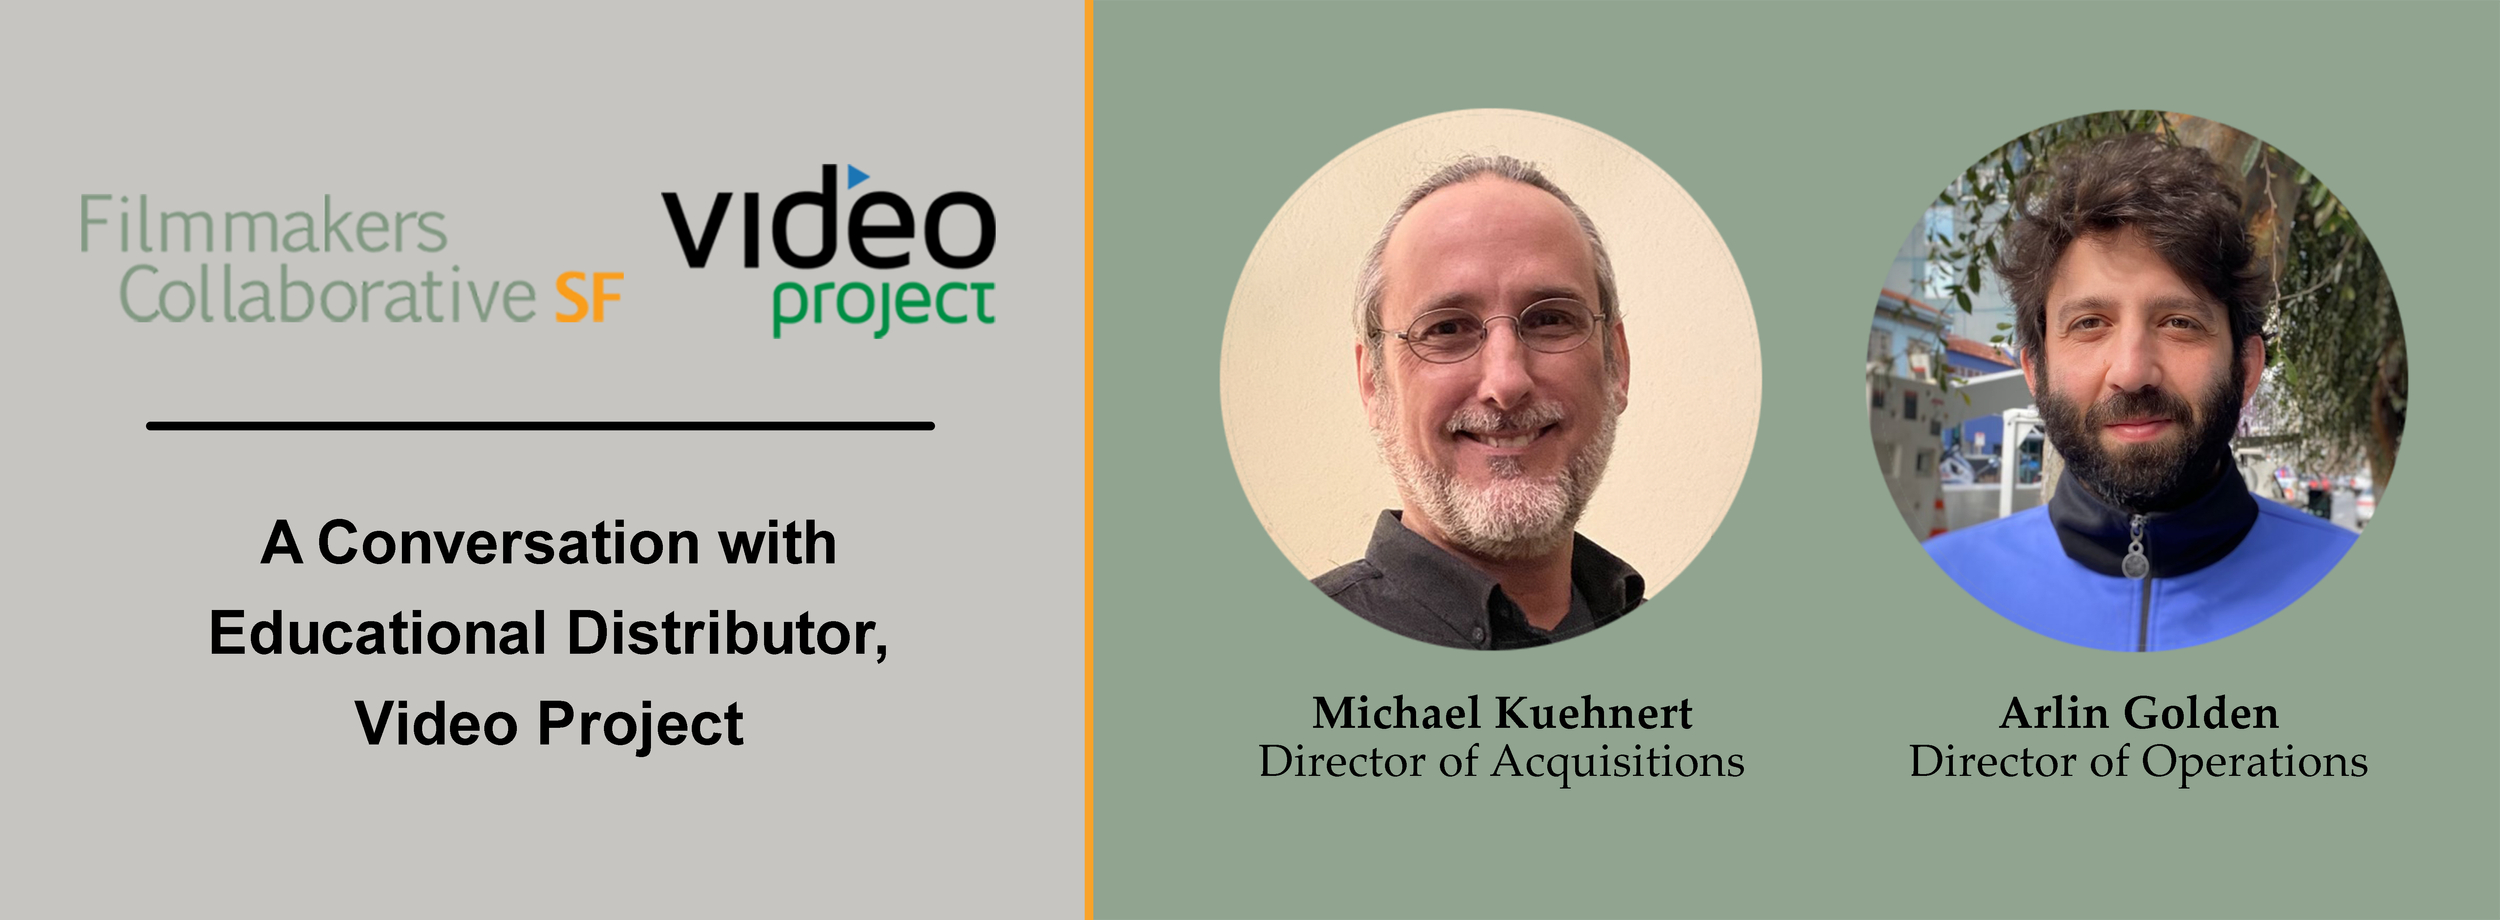 A Conversation with Educational Distributor, Video Project